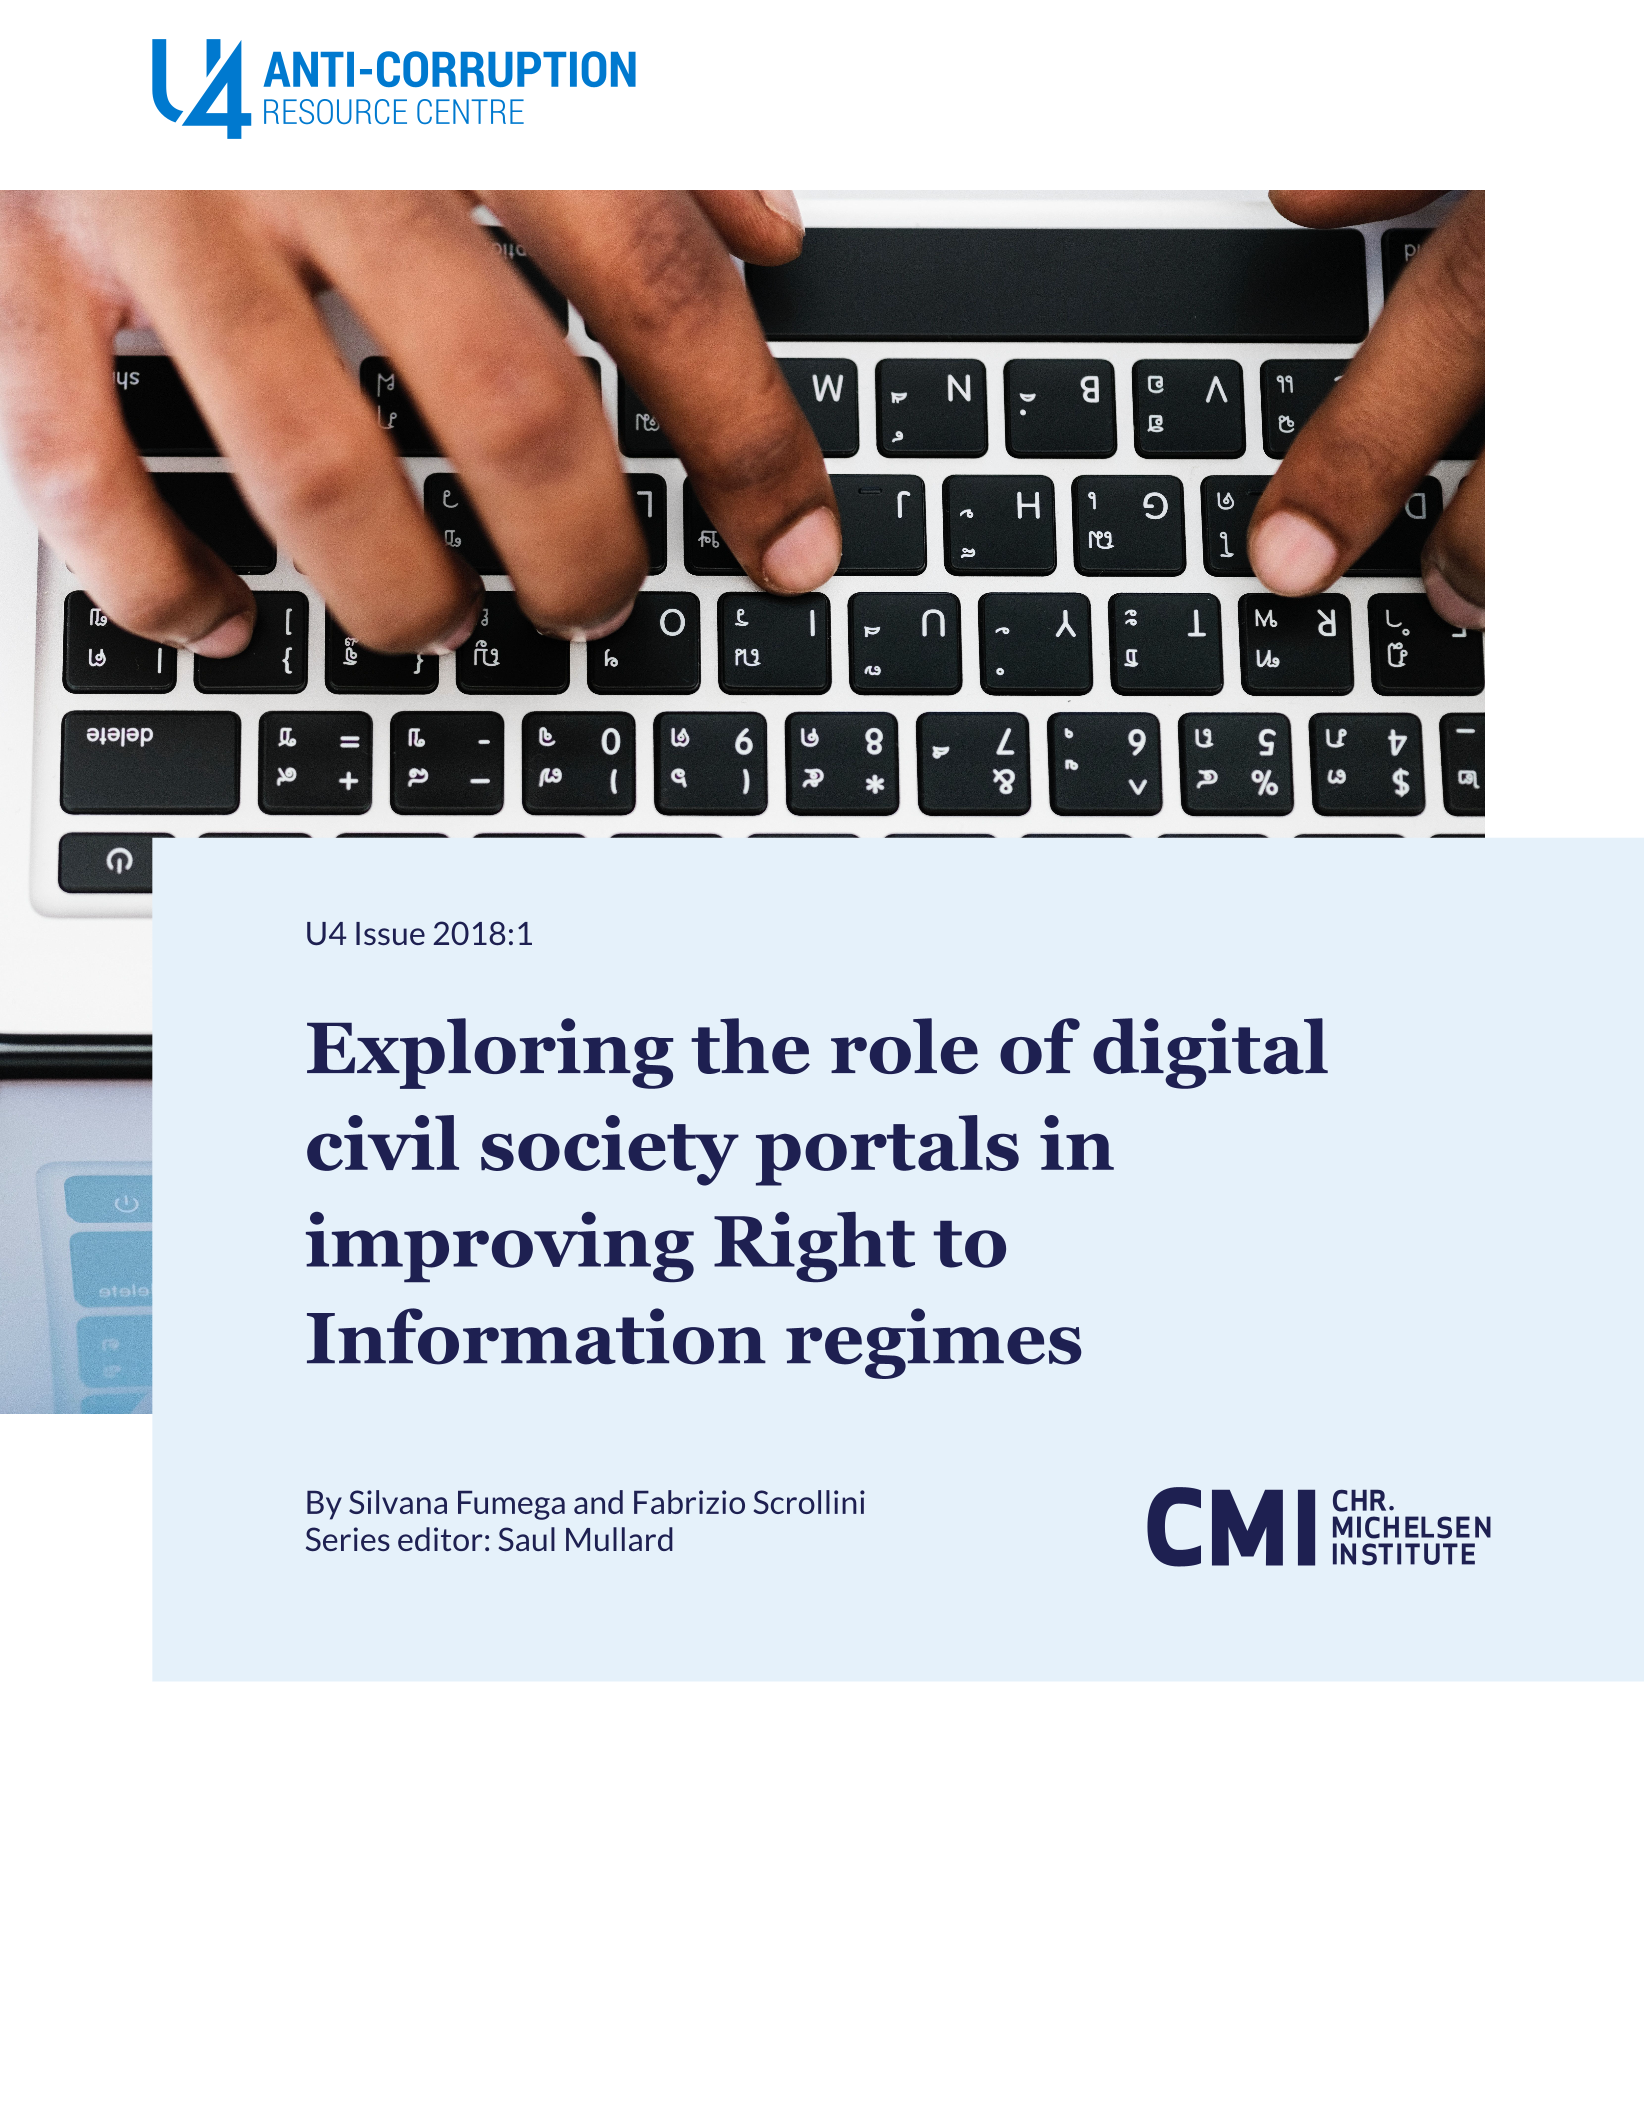 Exploring the role of digital civil society portals in improving Right to Information regimes